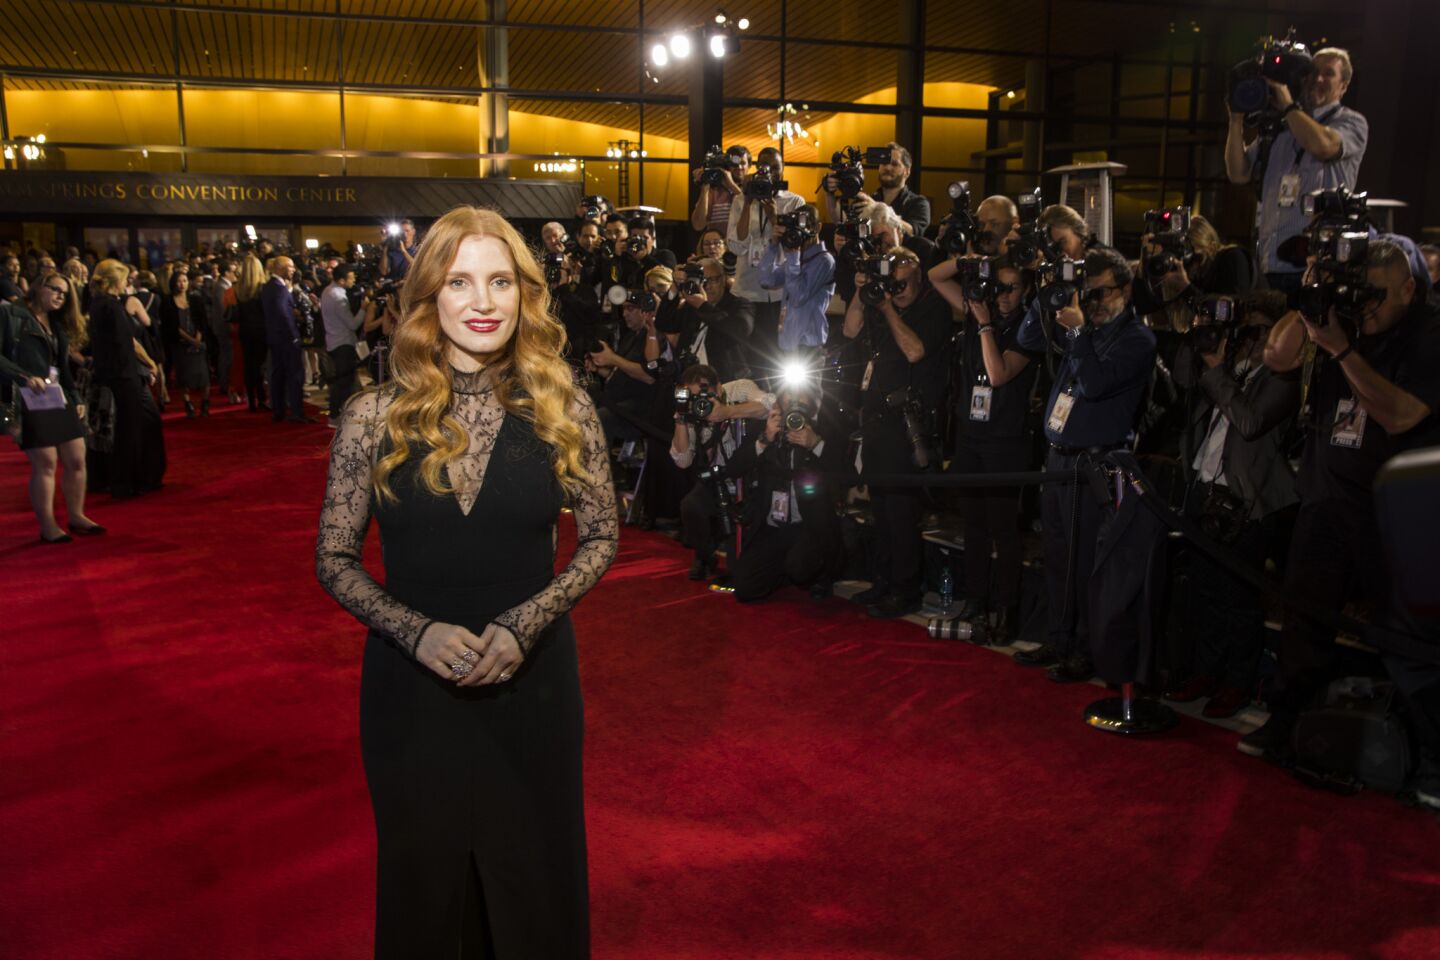 Jessica Chastain ("Molly's Game") on the red carpet of the 18th annual Palm Springs International Film Festival Gala. Chastain received the Chairman's Award.